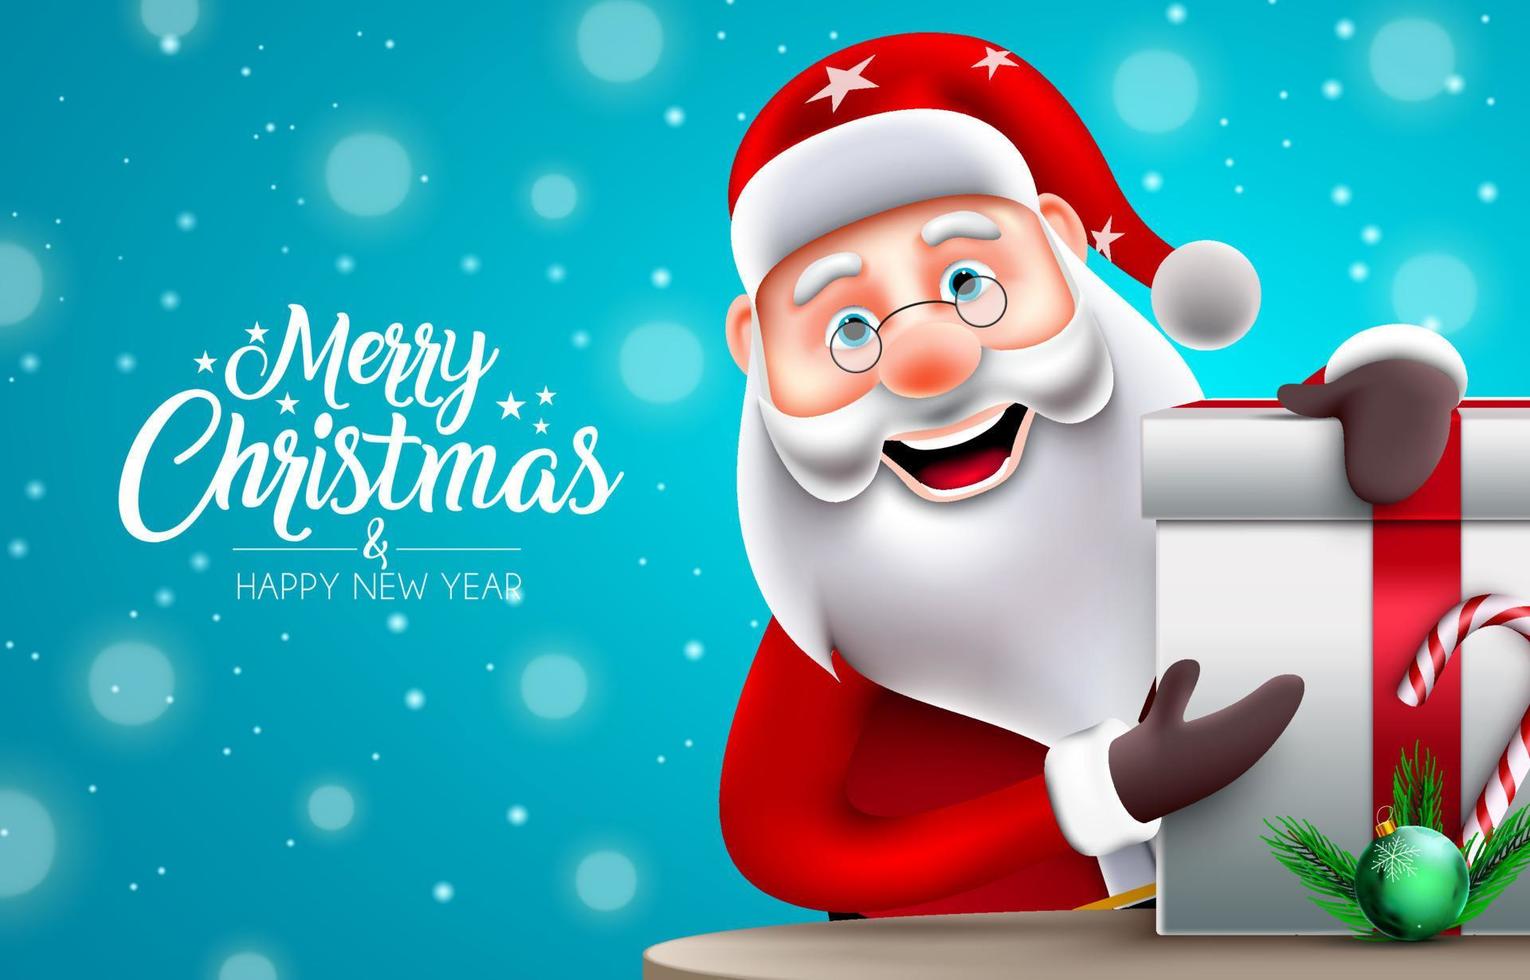 Christmas santa claus vector design. Merry christmas text with santa character giving and holding gift box in snowy background for xmas holiday celebration greeting. Vector illustration